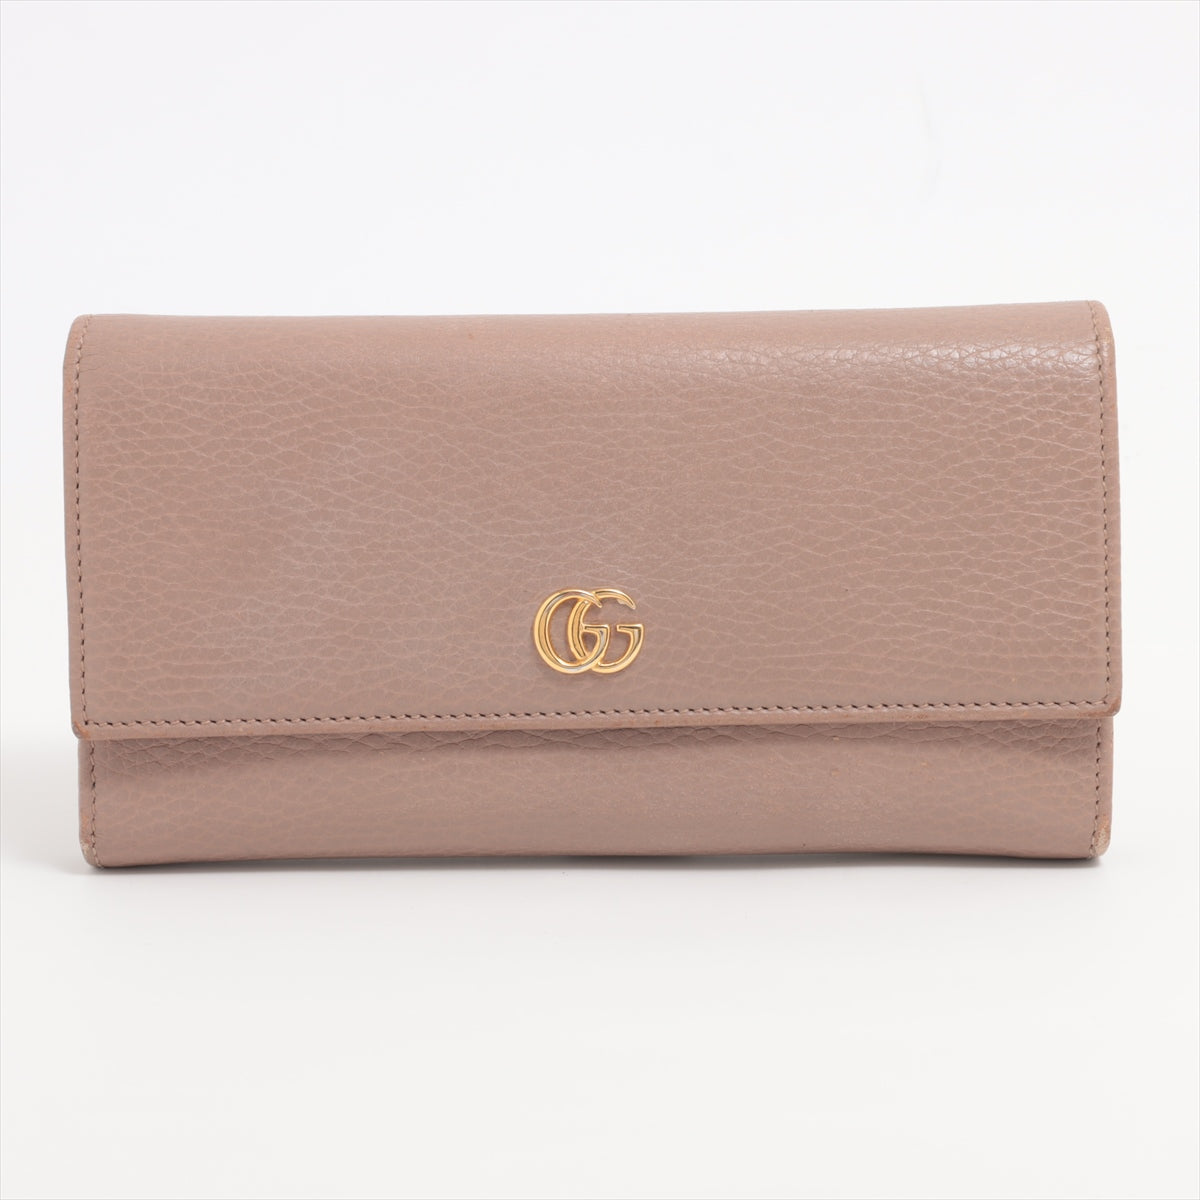 Gucci GG Marmont 456116 Leather Wallet Pink beige